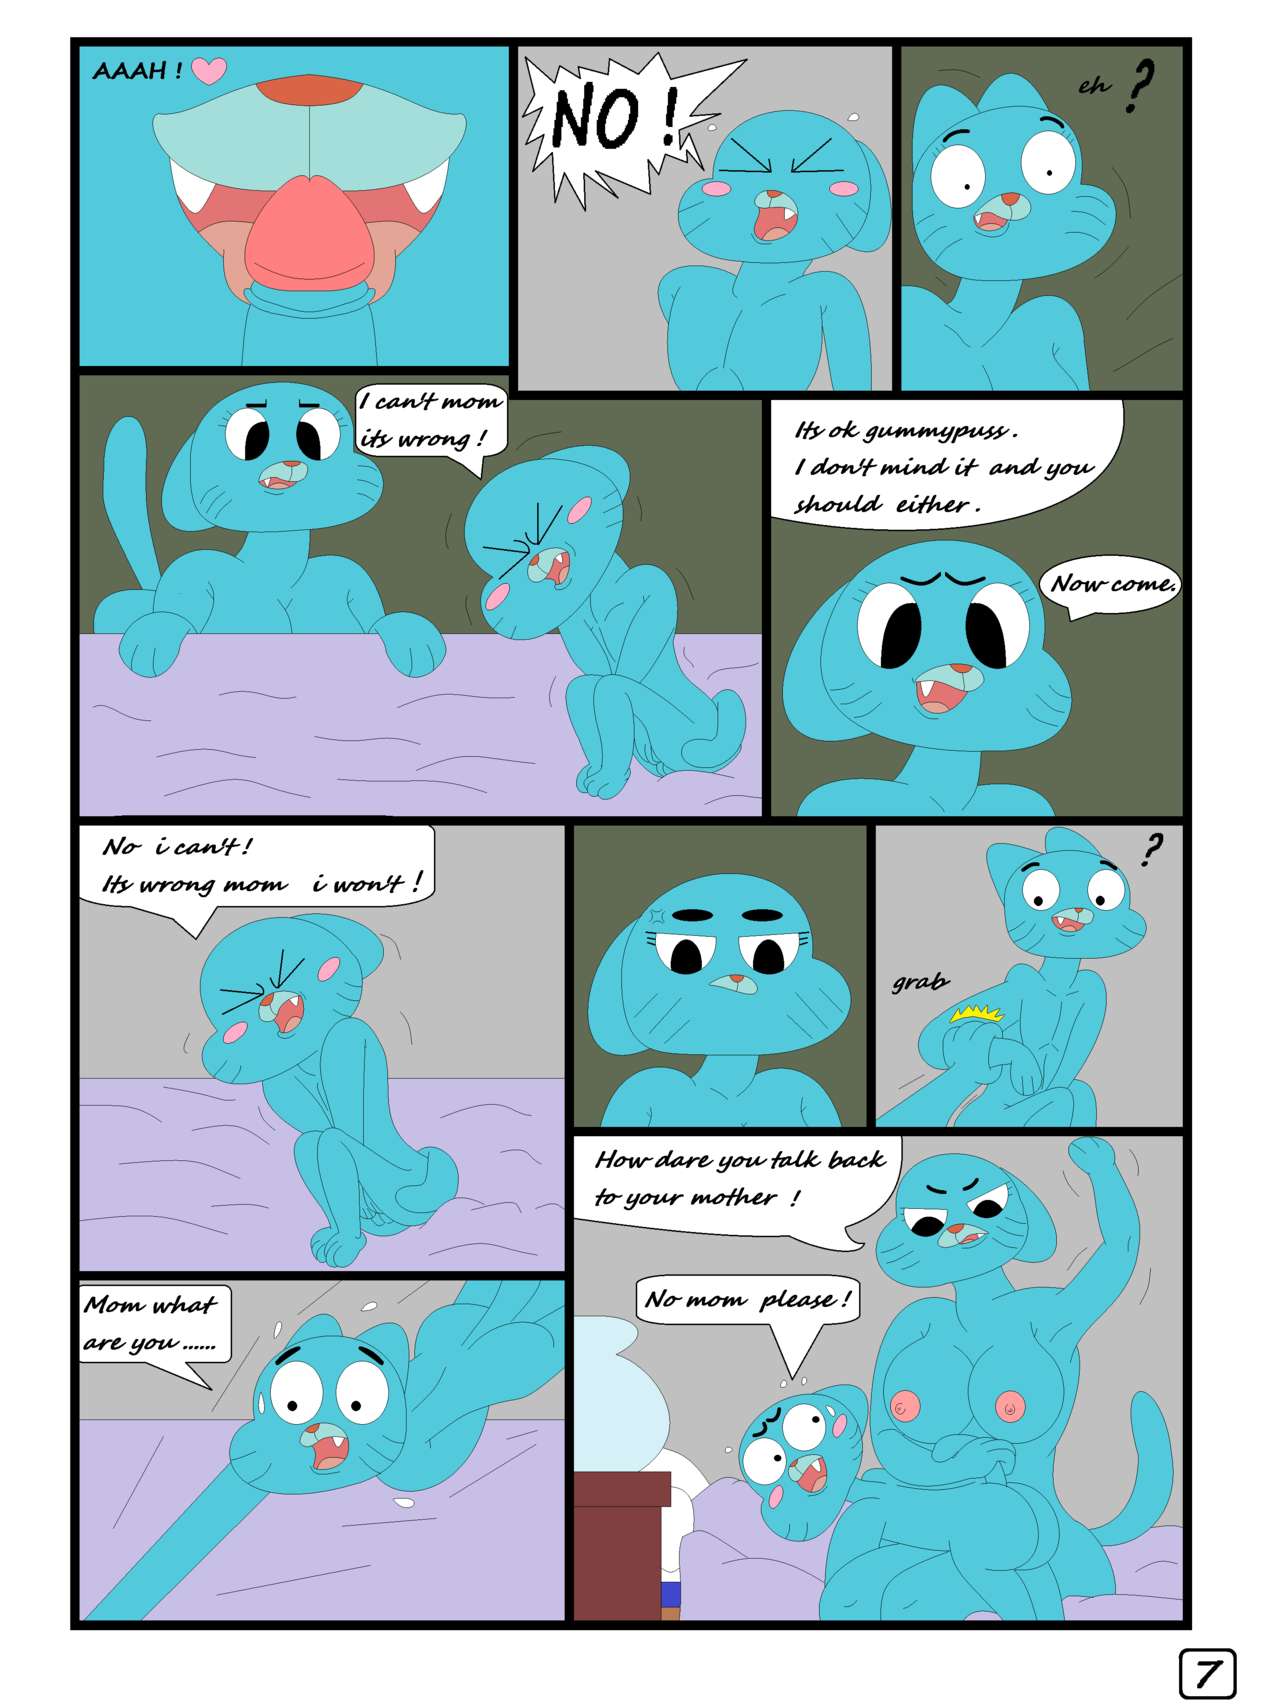 Rour in so much trouble porn comic amazing world